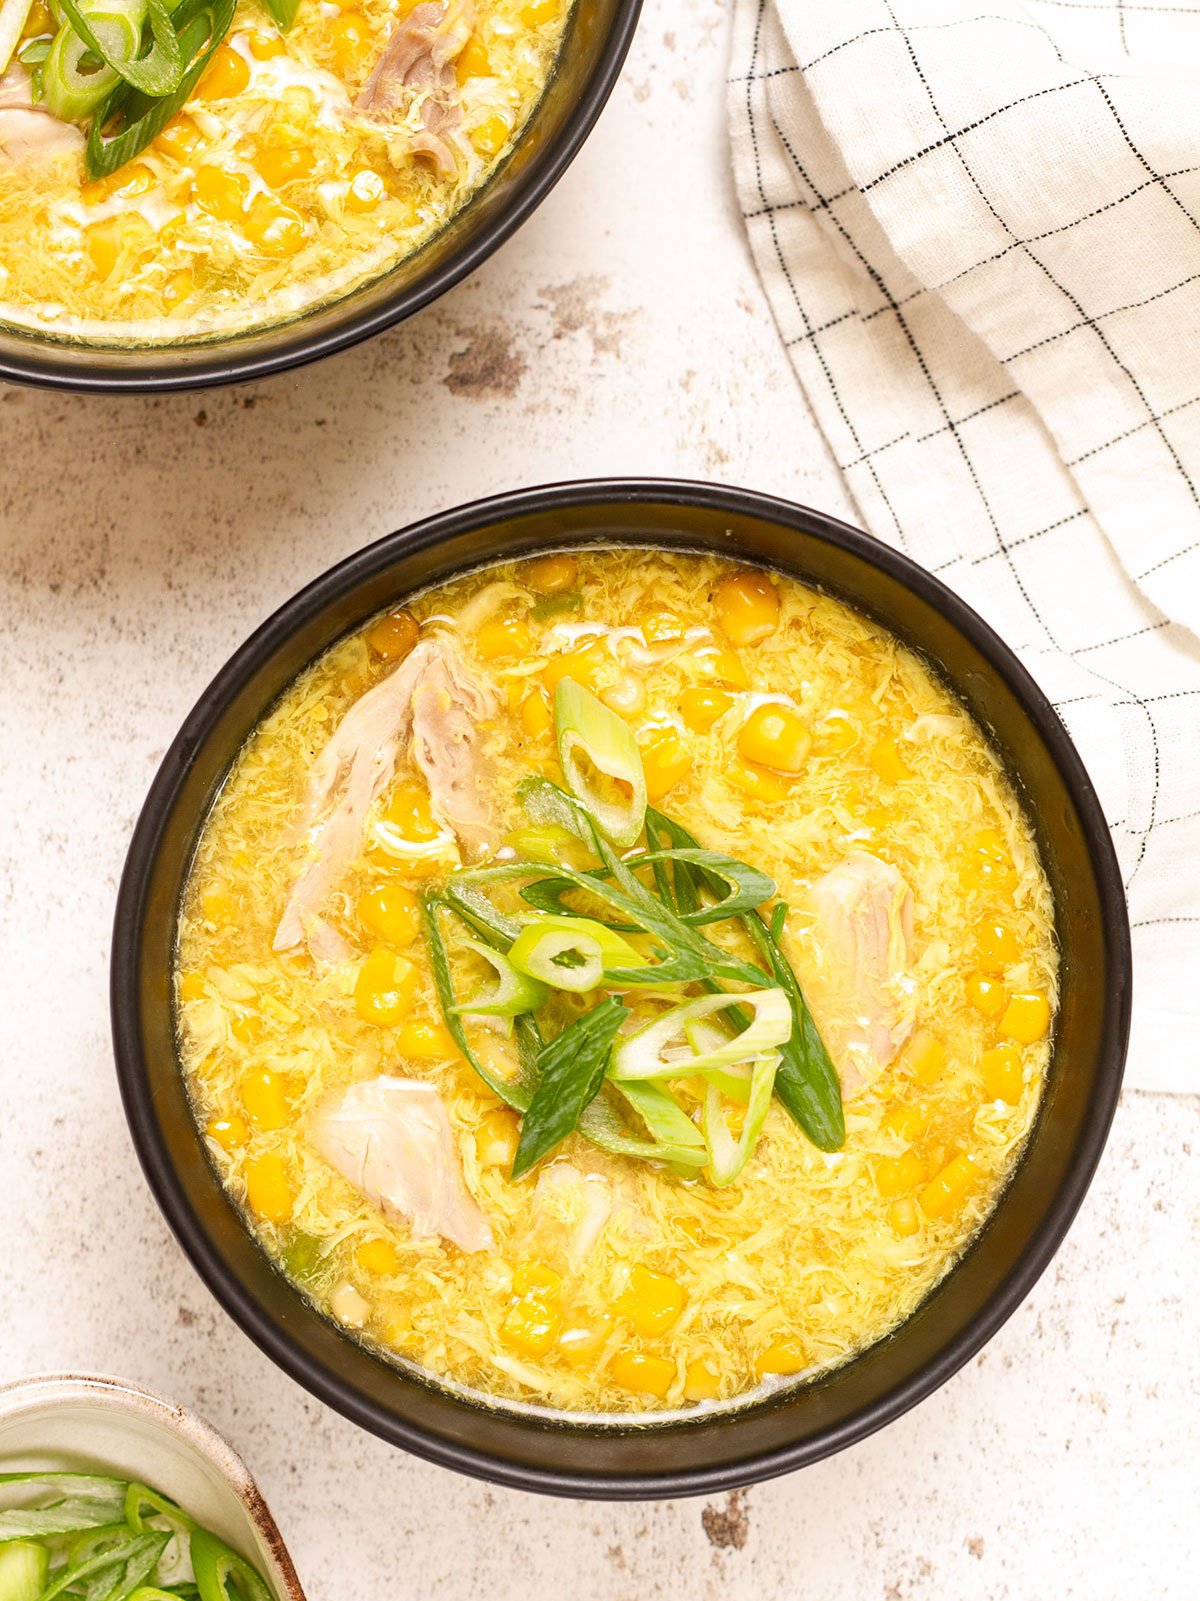 https://knifeandsoul.com/wp-content/uploads/2022/11/chicken-and-sweetcorn-soup-feature.jpg